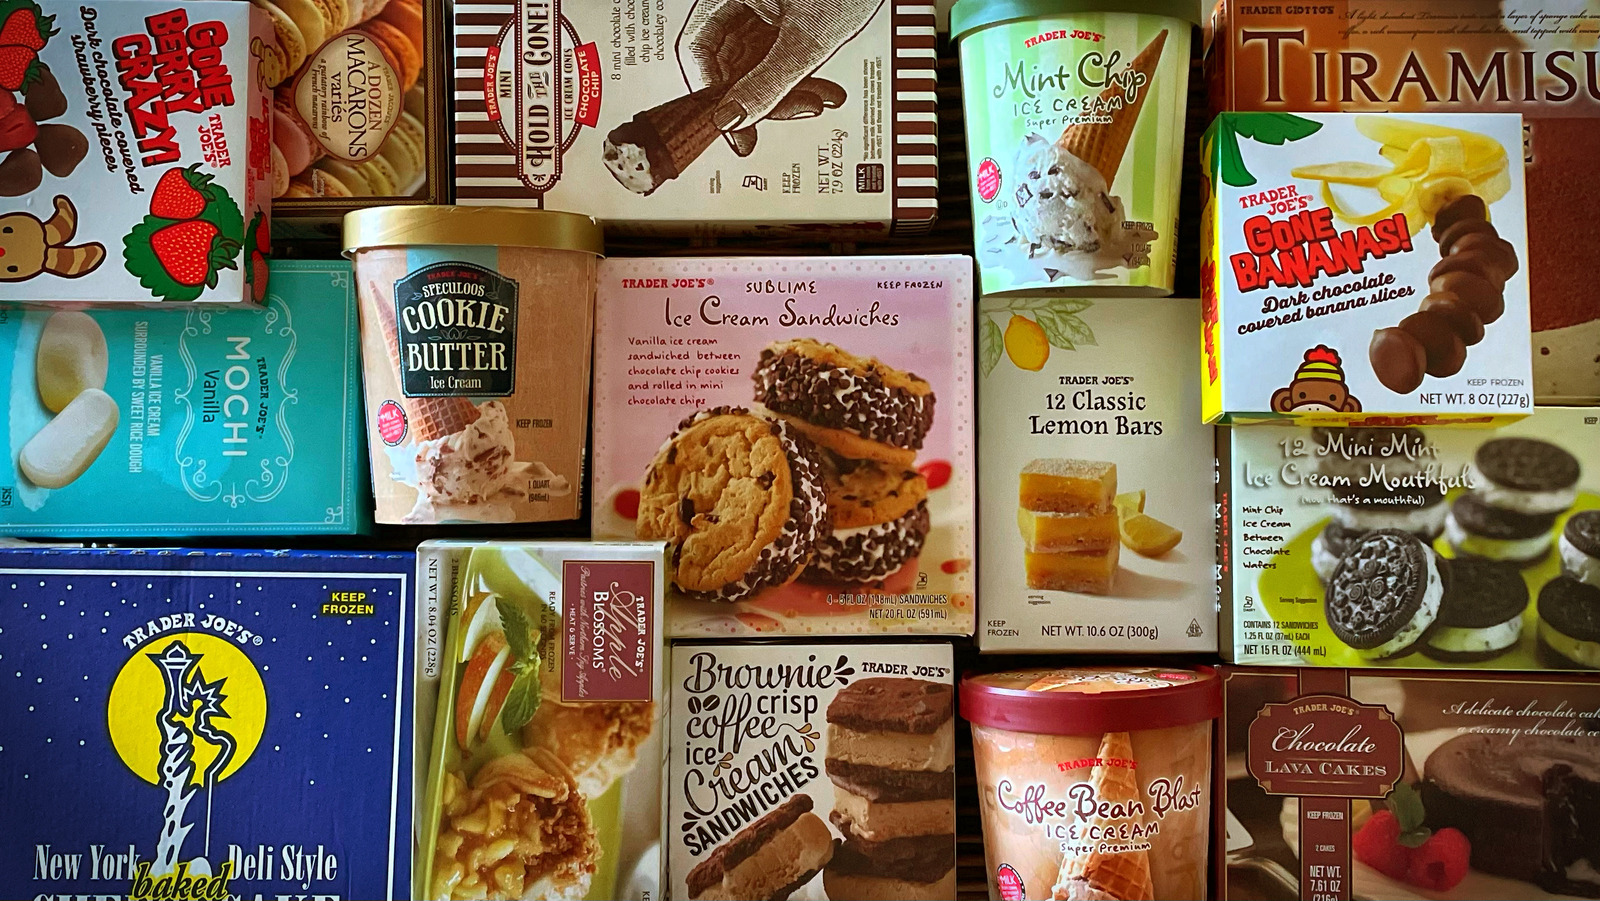 https://www.tastingtable.com/img/gallery/17-trader-joes-frozen-desserts-ranked-from-worst-to-best/l-intro-1675800765.jpg